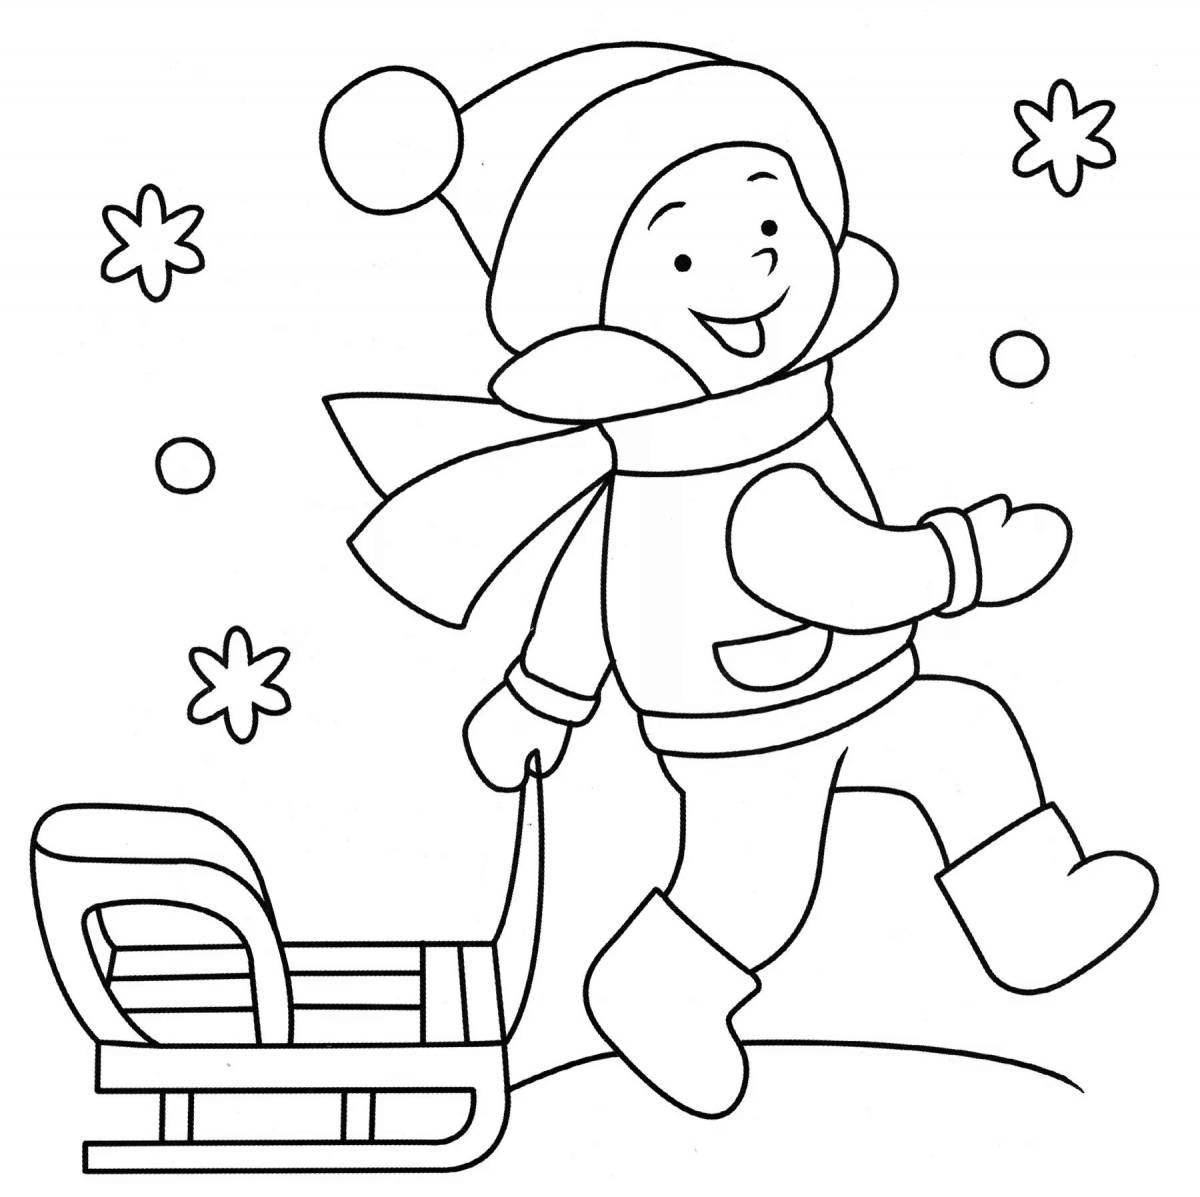 Fun coloring book for kids outdoors in winter